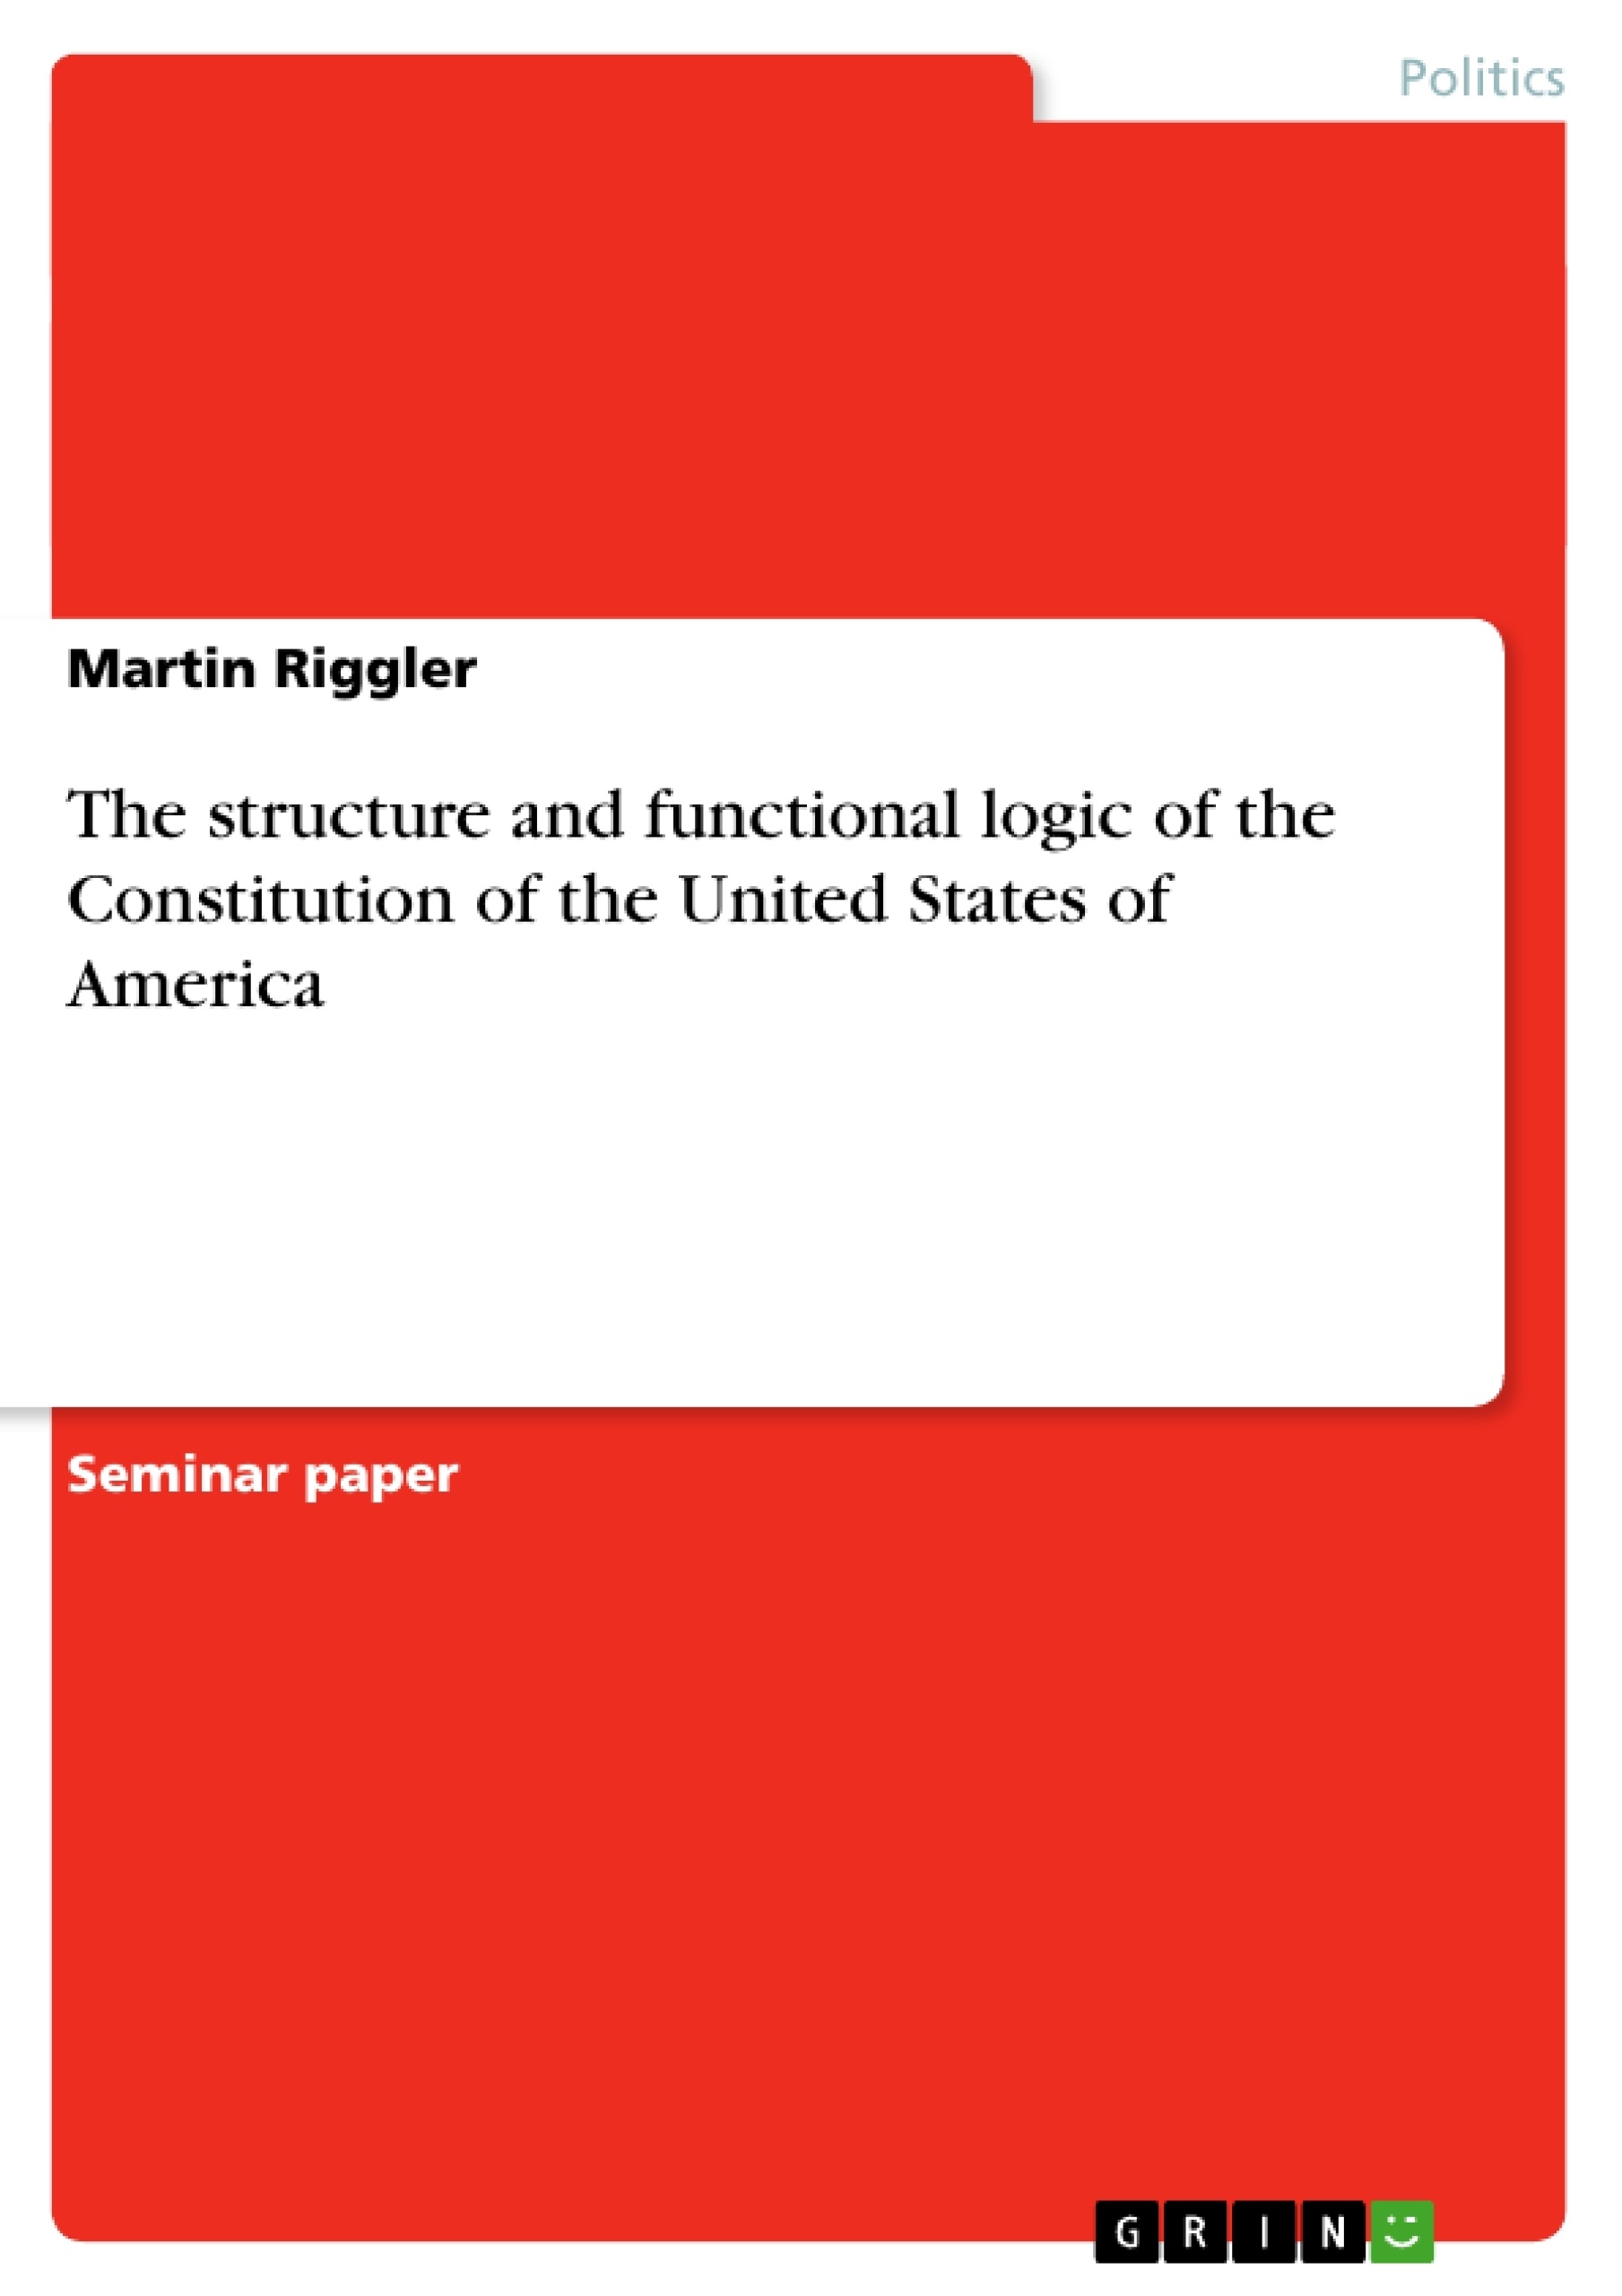 Title: The structure and functional logic of the Constitution of the United States of America